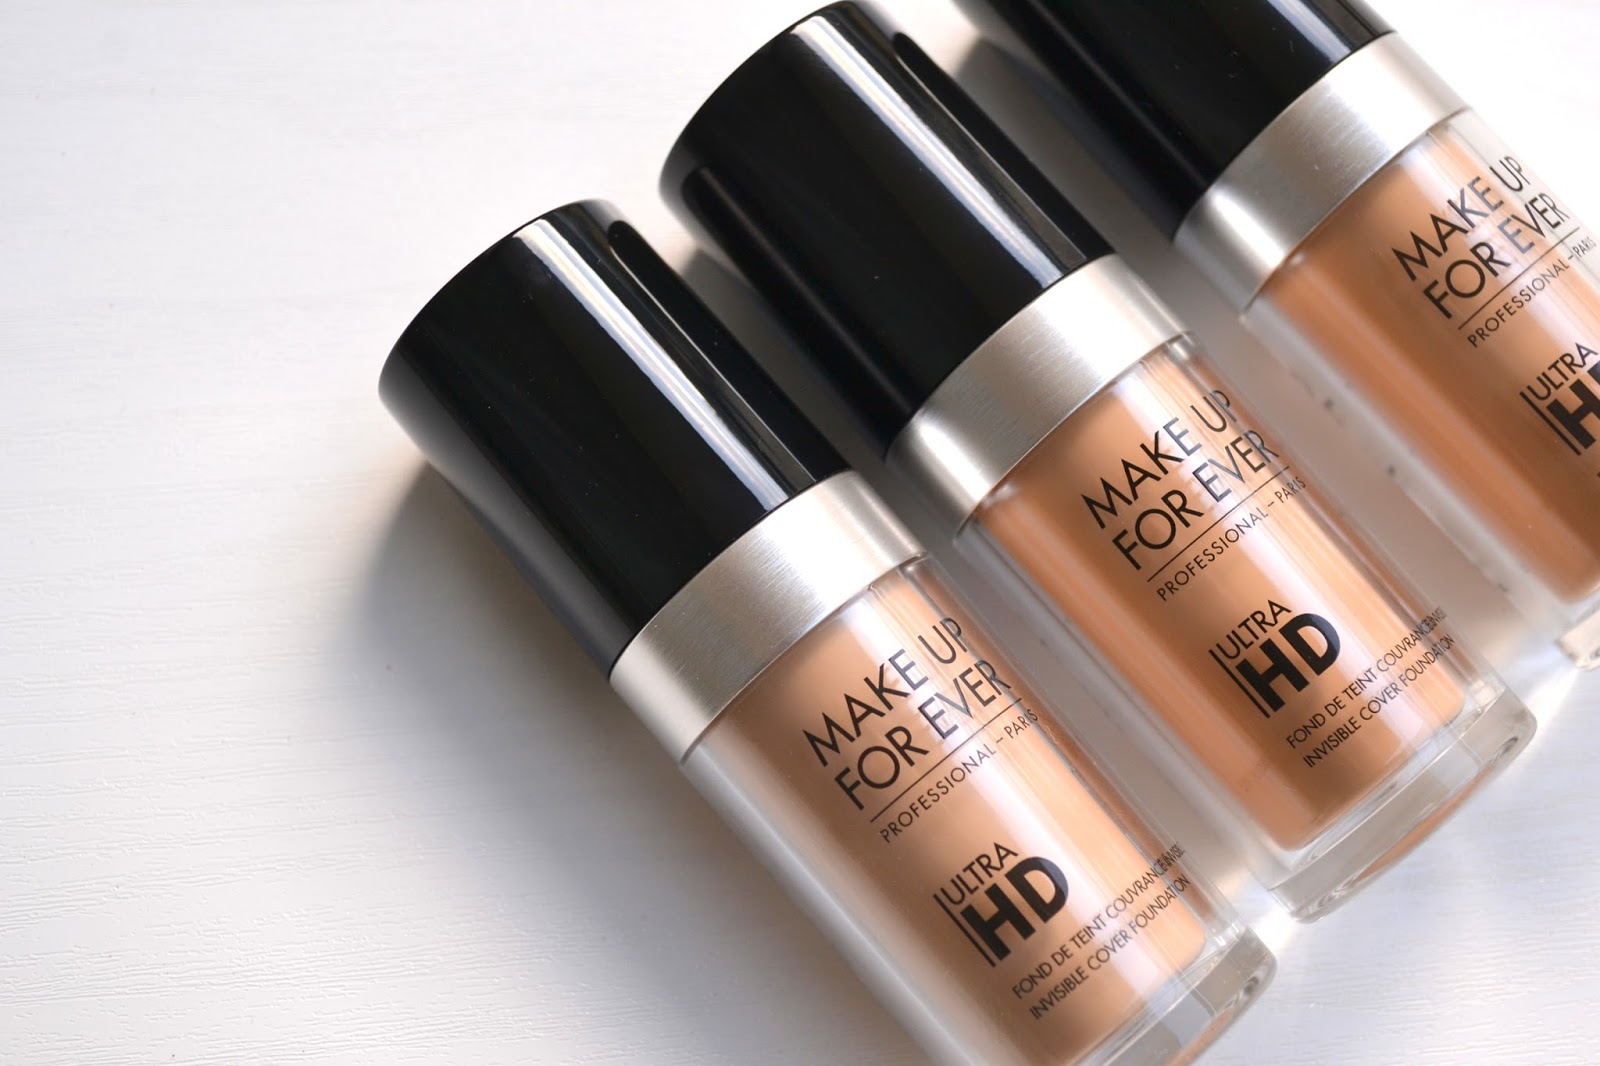 MAKEUP | Make For Ever Ultra HD Invisible Cover Foundation in Y235, Y245 and Y255 Review, Swatches and Pretty Face Photos | Cosmetic Proof Vancouver beauty, nail art and lifestyle blog